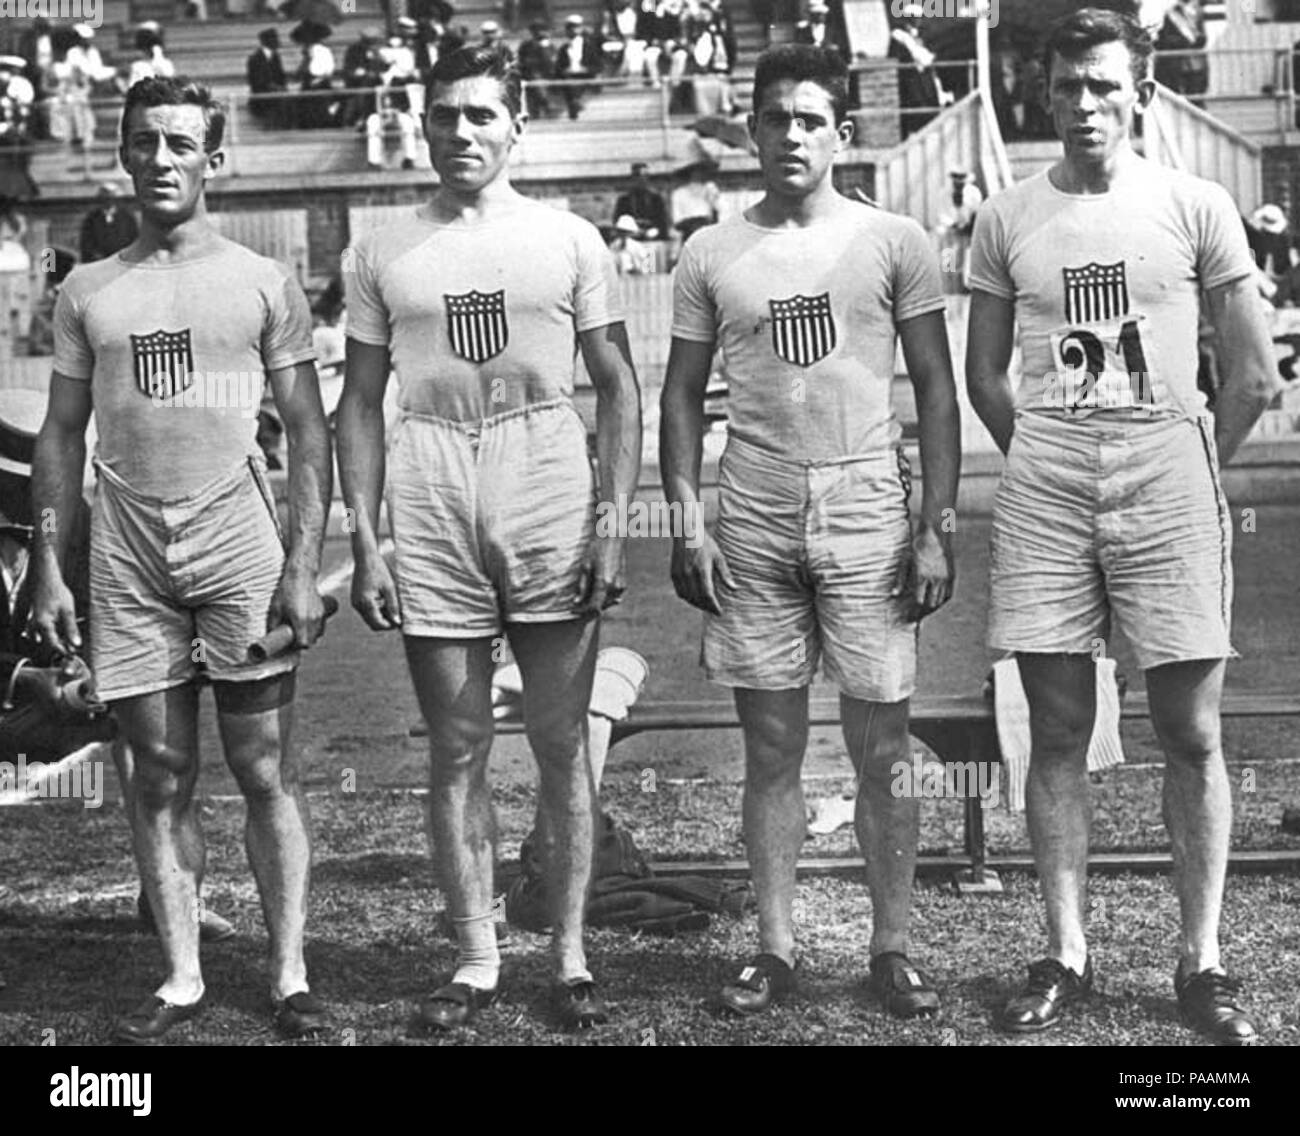 6-15 Jul 1912:  Portrait of Charles Reidpath, Edward Lindberg, James Meredith and Melvin Sheppard of the USA, the American 4 x 400 Metres Relay team, during the 1912 Olympic Games in Stockholm, Sweden.  The American team won the gold medal in this event. Mandatory Credit: IOC Olympic Museum  /Allsport 300 Charles Reidpath, Edward Lindberg, James Meredith and Melvin Sheppard 1912 Stock Photo